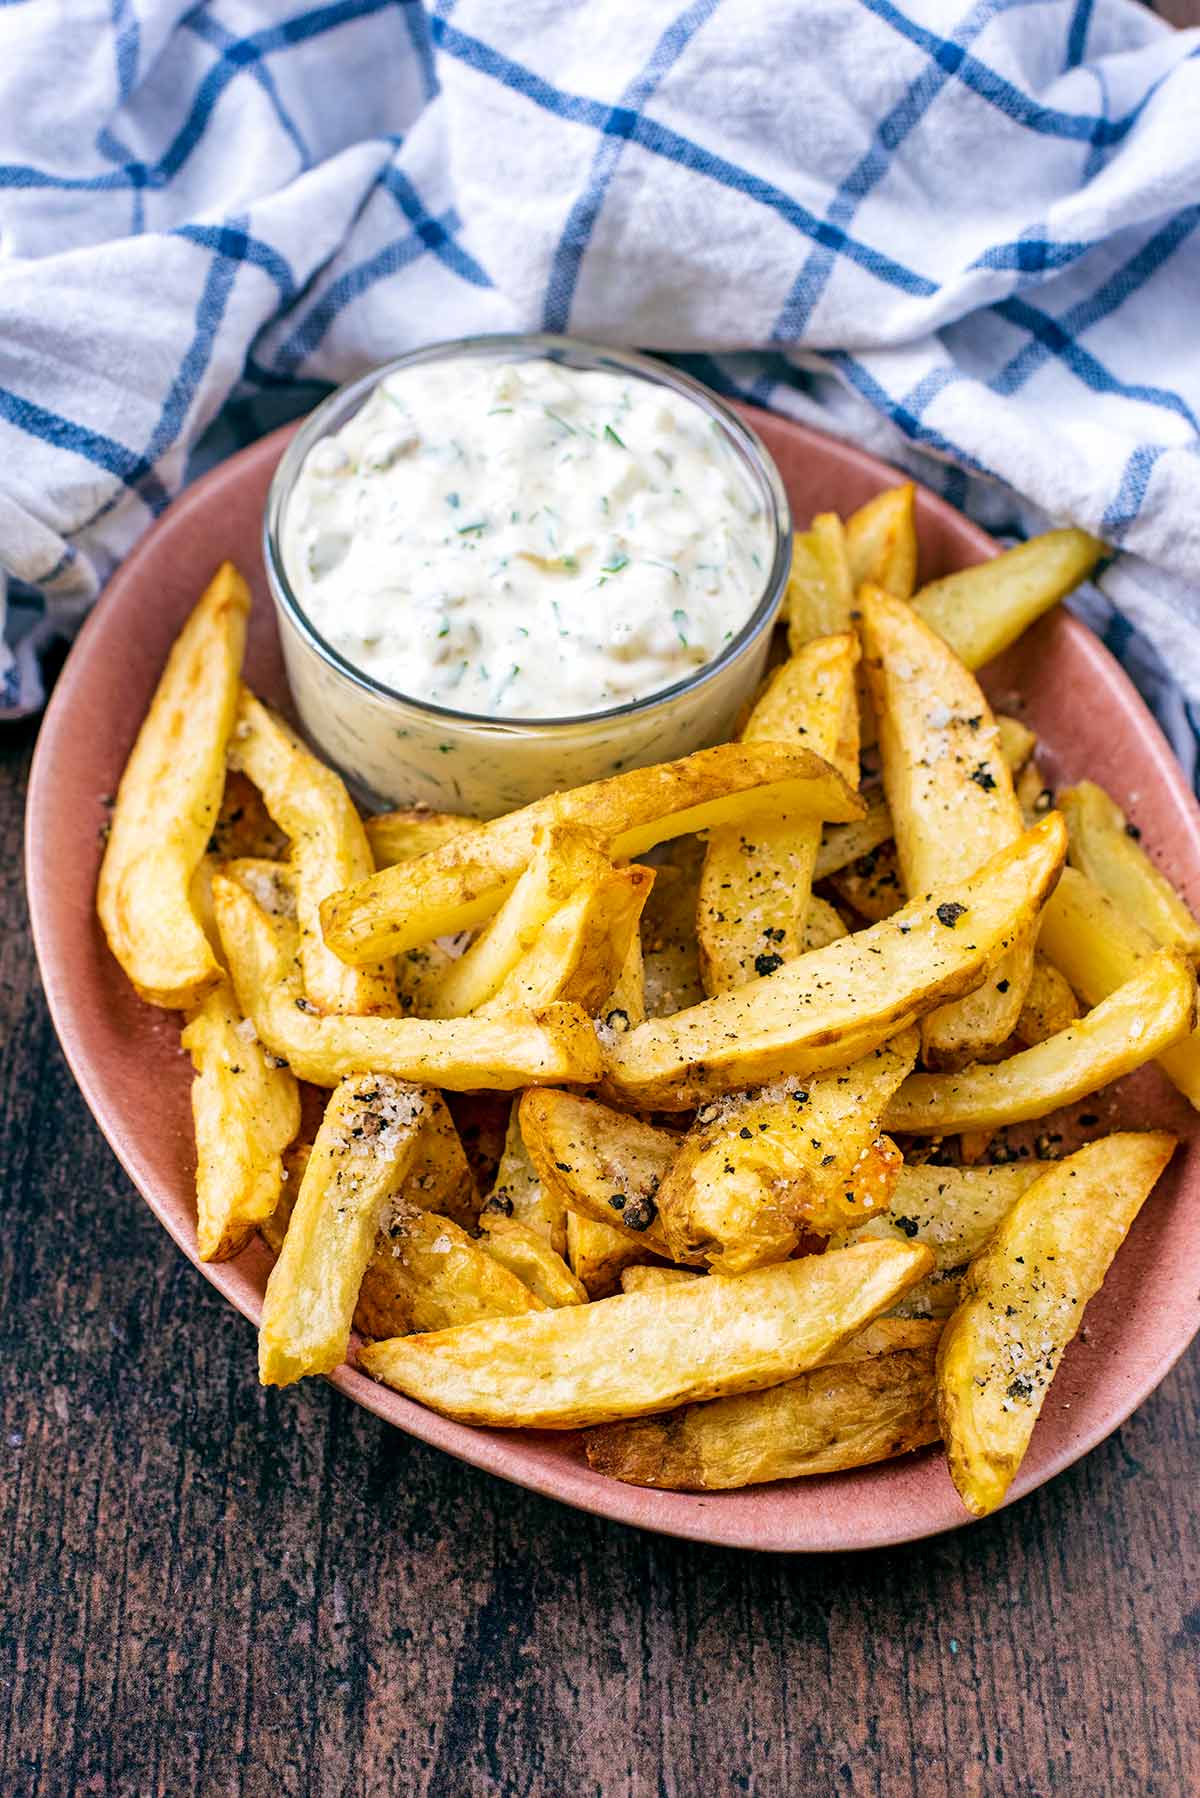 A plate of chips with a small pot of tartare sauce.